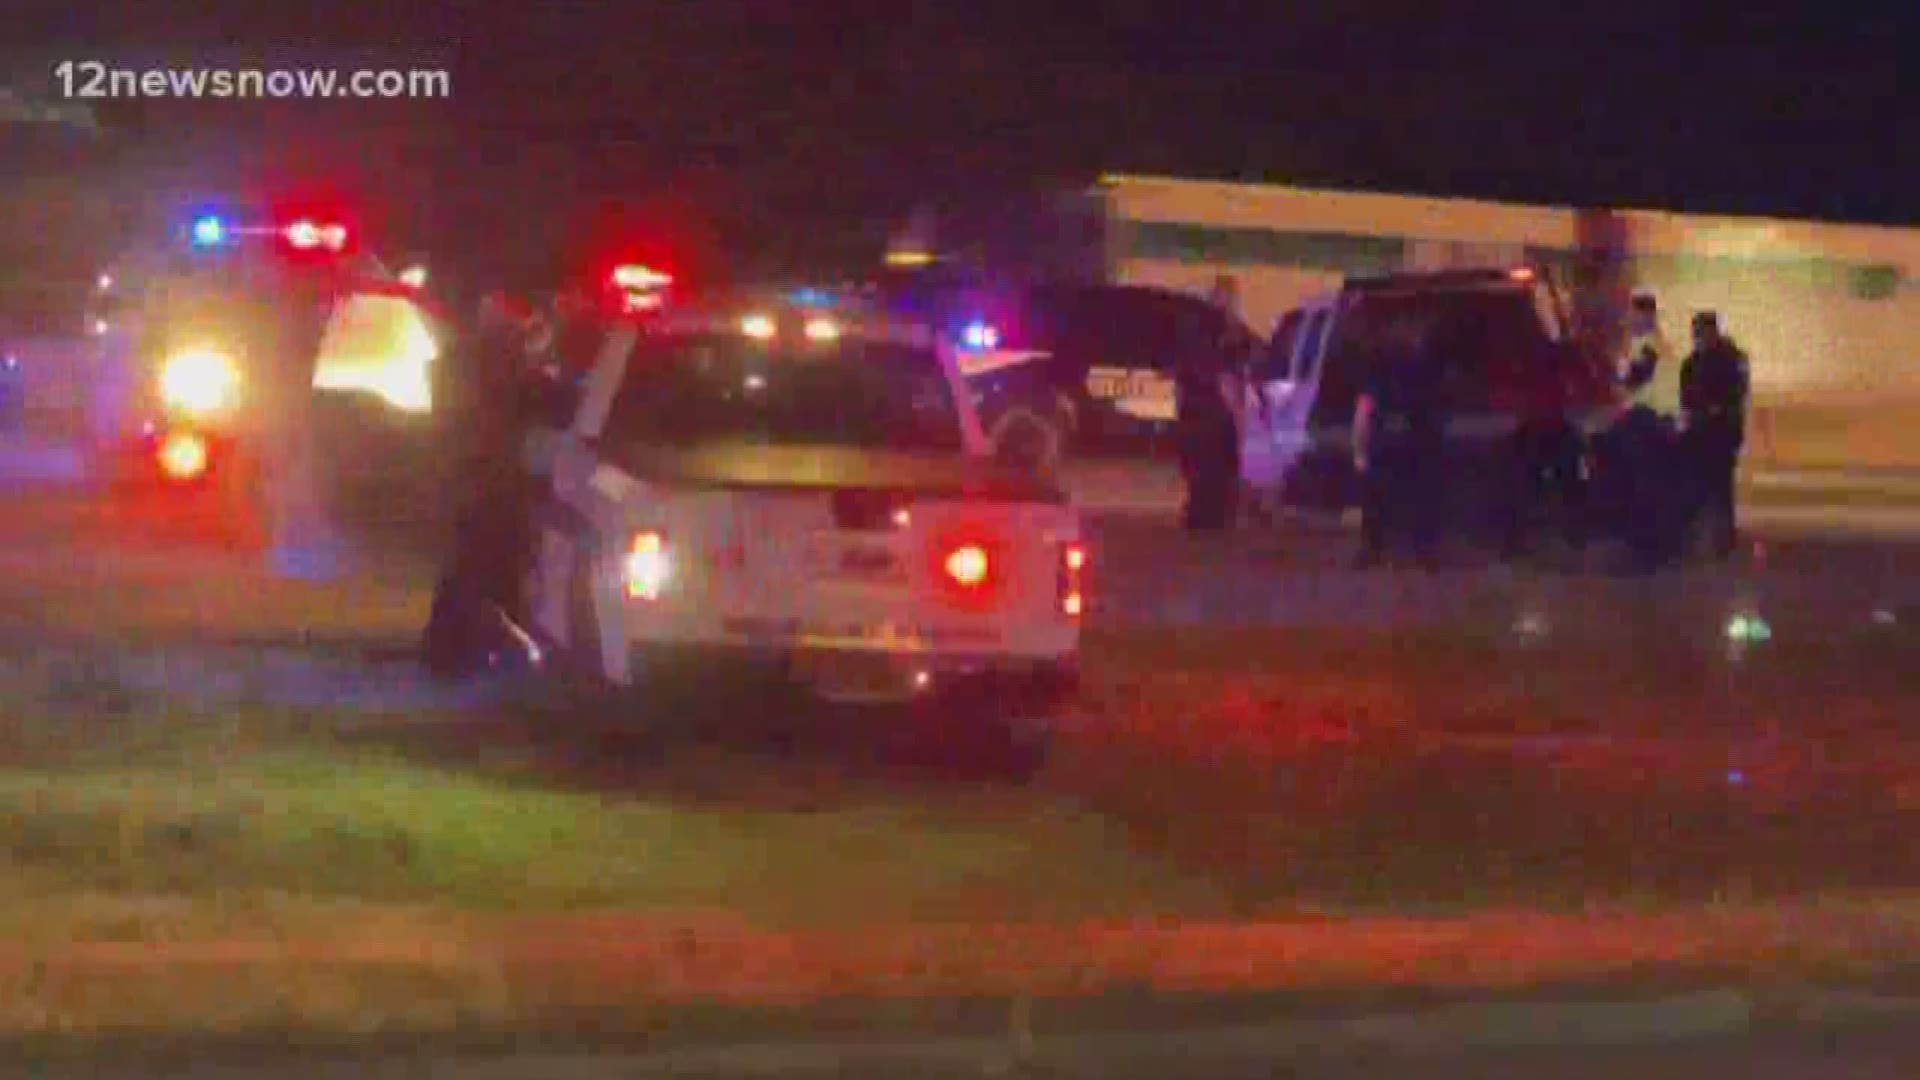 A chase that began in Louisiana early Tuesday morning ended along IH-10 in Beaumont.